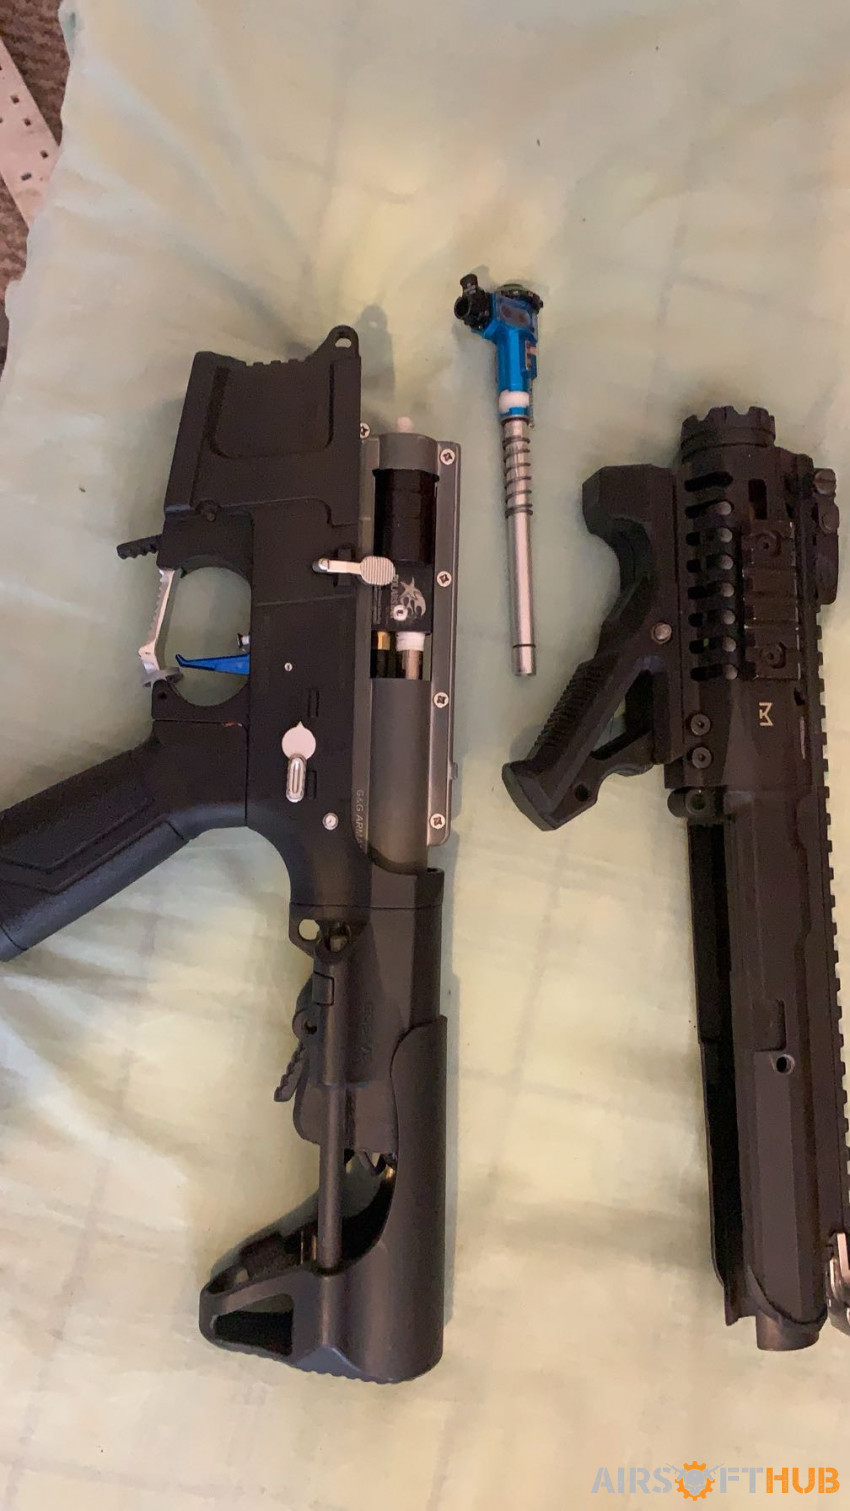 Arp9 hpa bundle - Used airsoft equipment